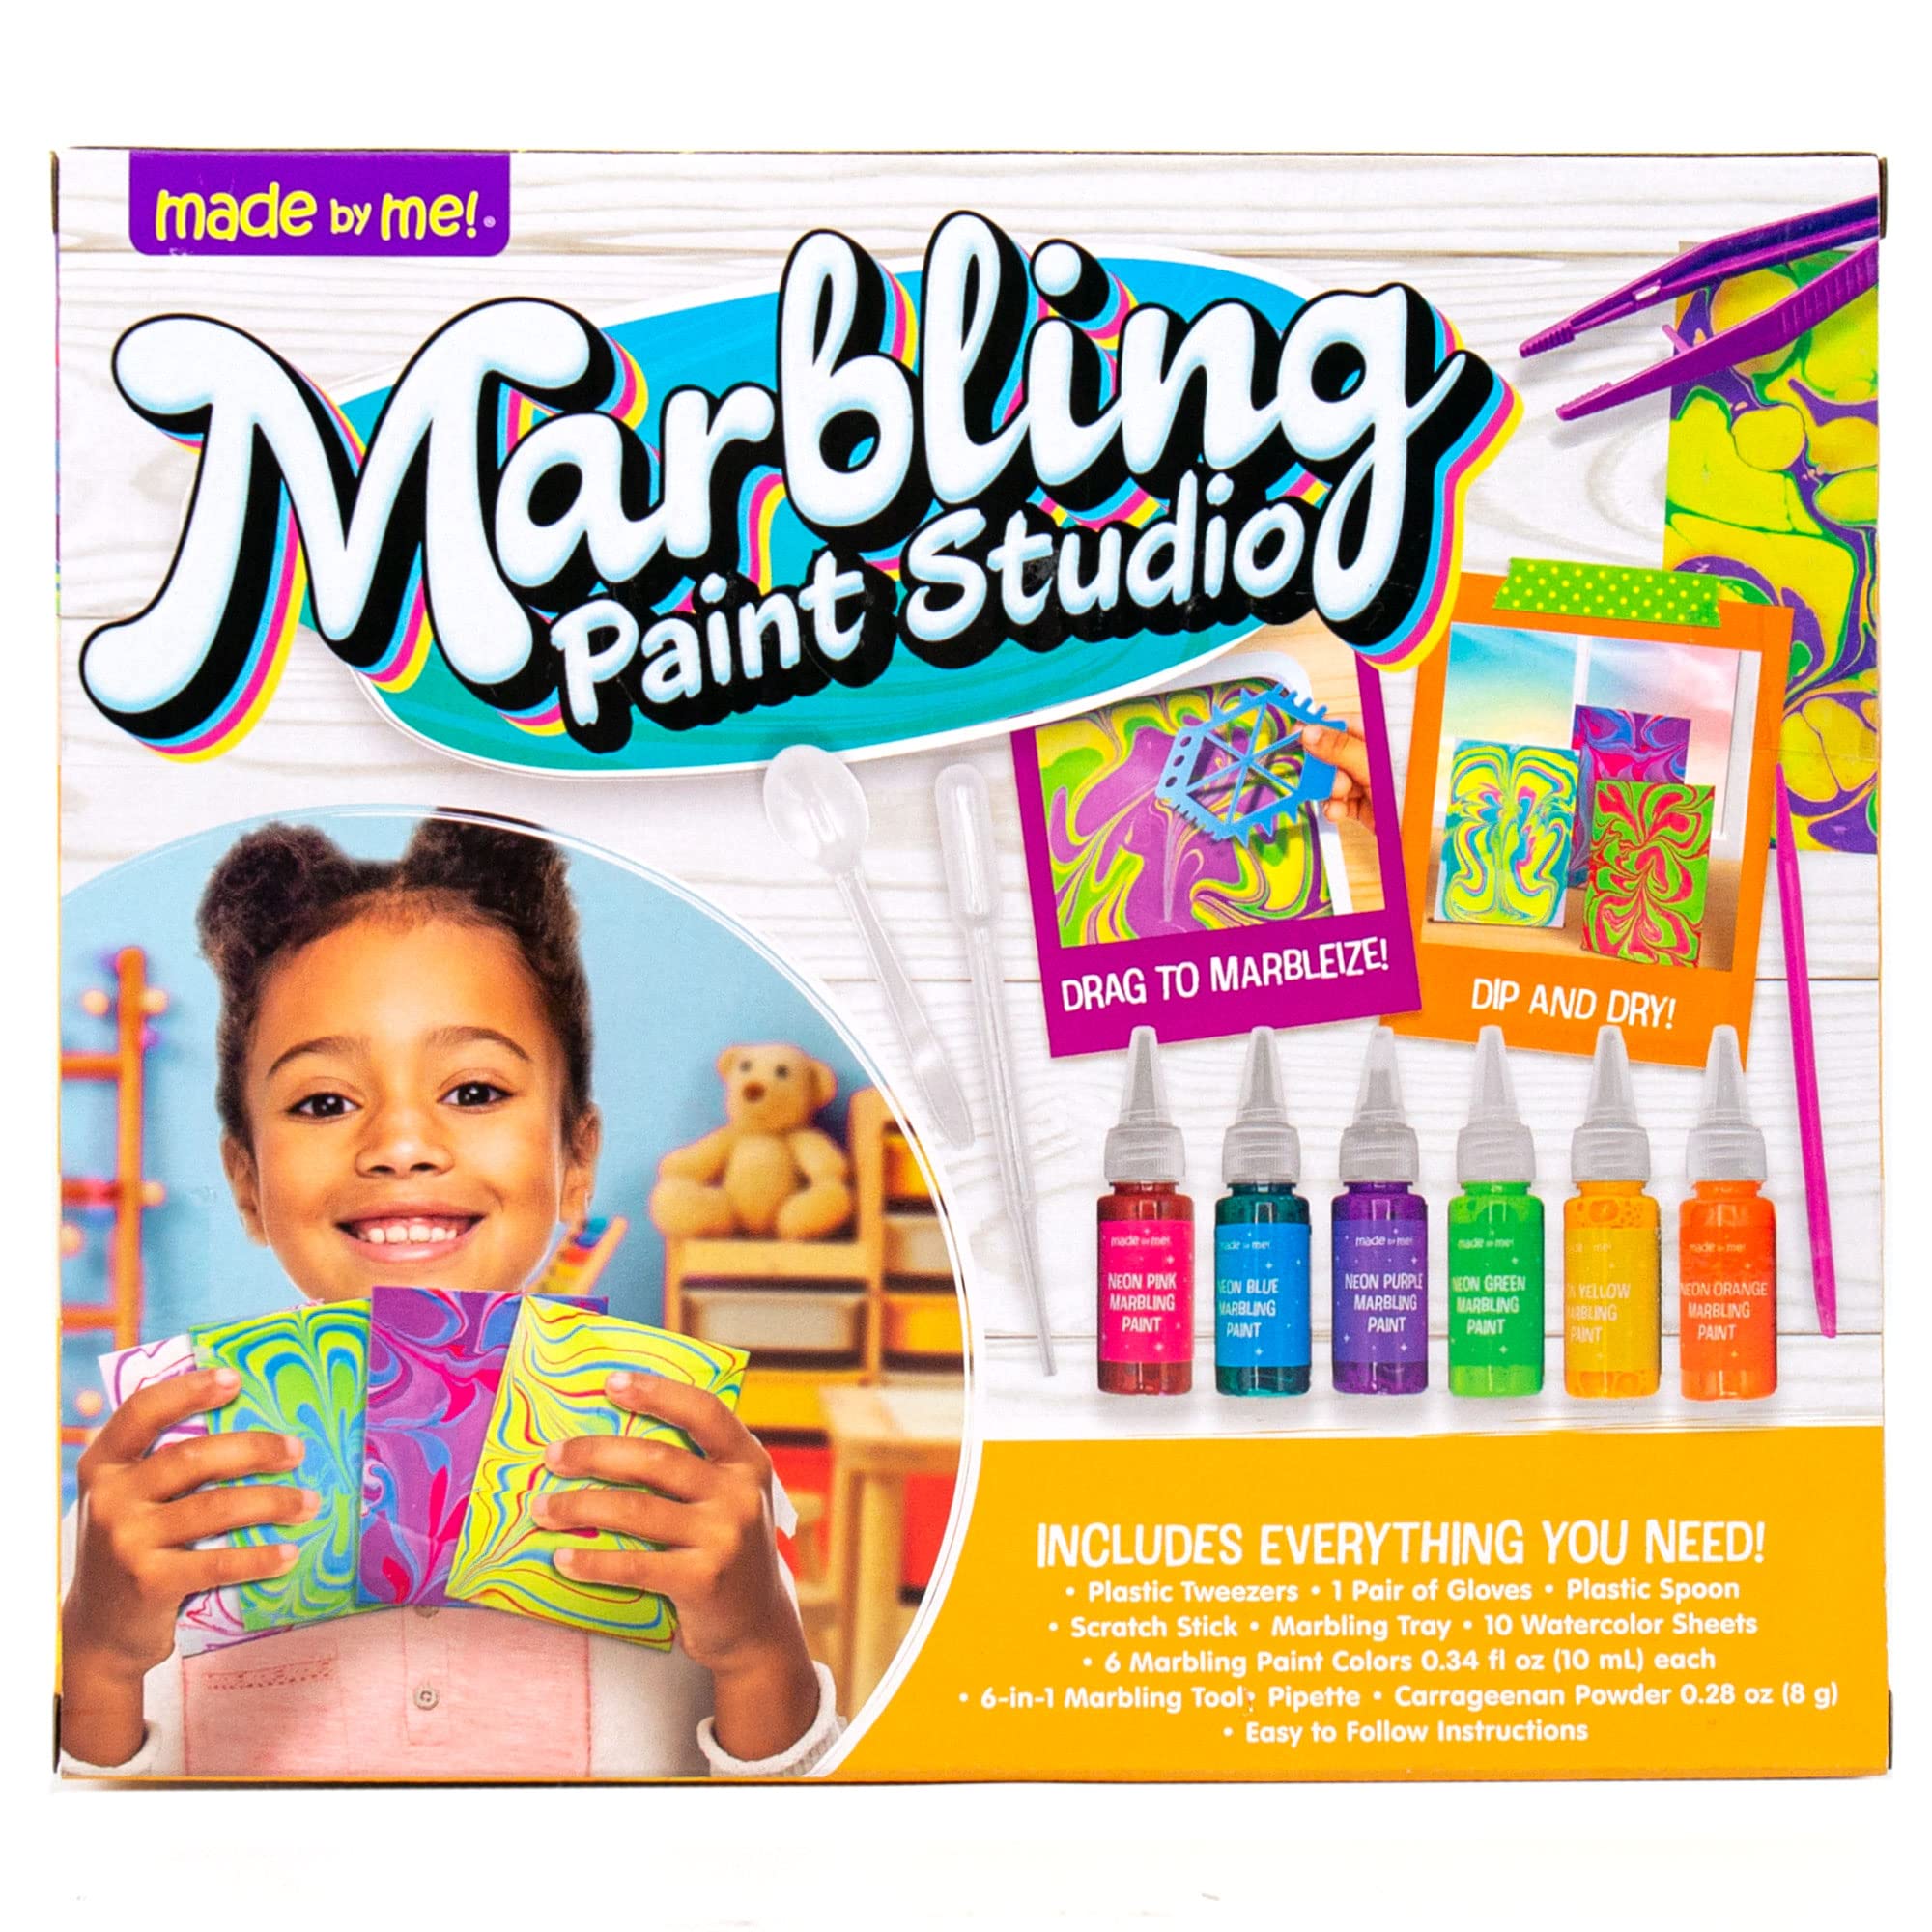 Made By Me Marbling Paint Studio, 25-Piece Marbling Kit for Kids, Make 10 Pour Paint Art Projects, Dip & Paint Marbling Arts & Crafts Kits for Kids, Less Mess Pour Paint for Ages 6, 7, 8 & 9, Fun Gift